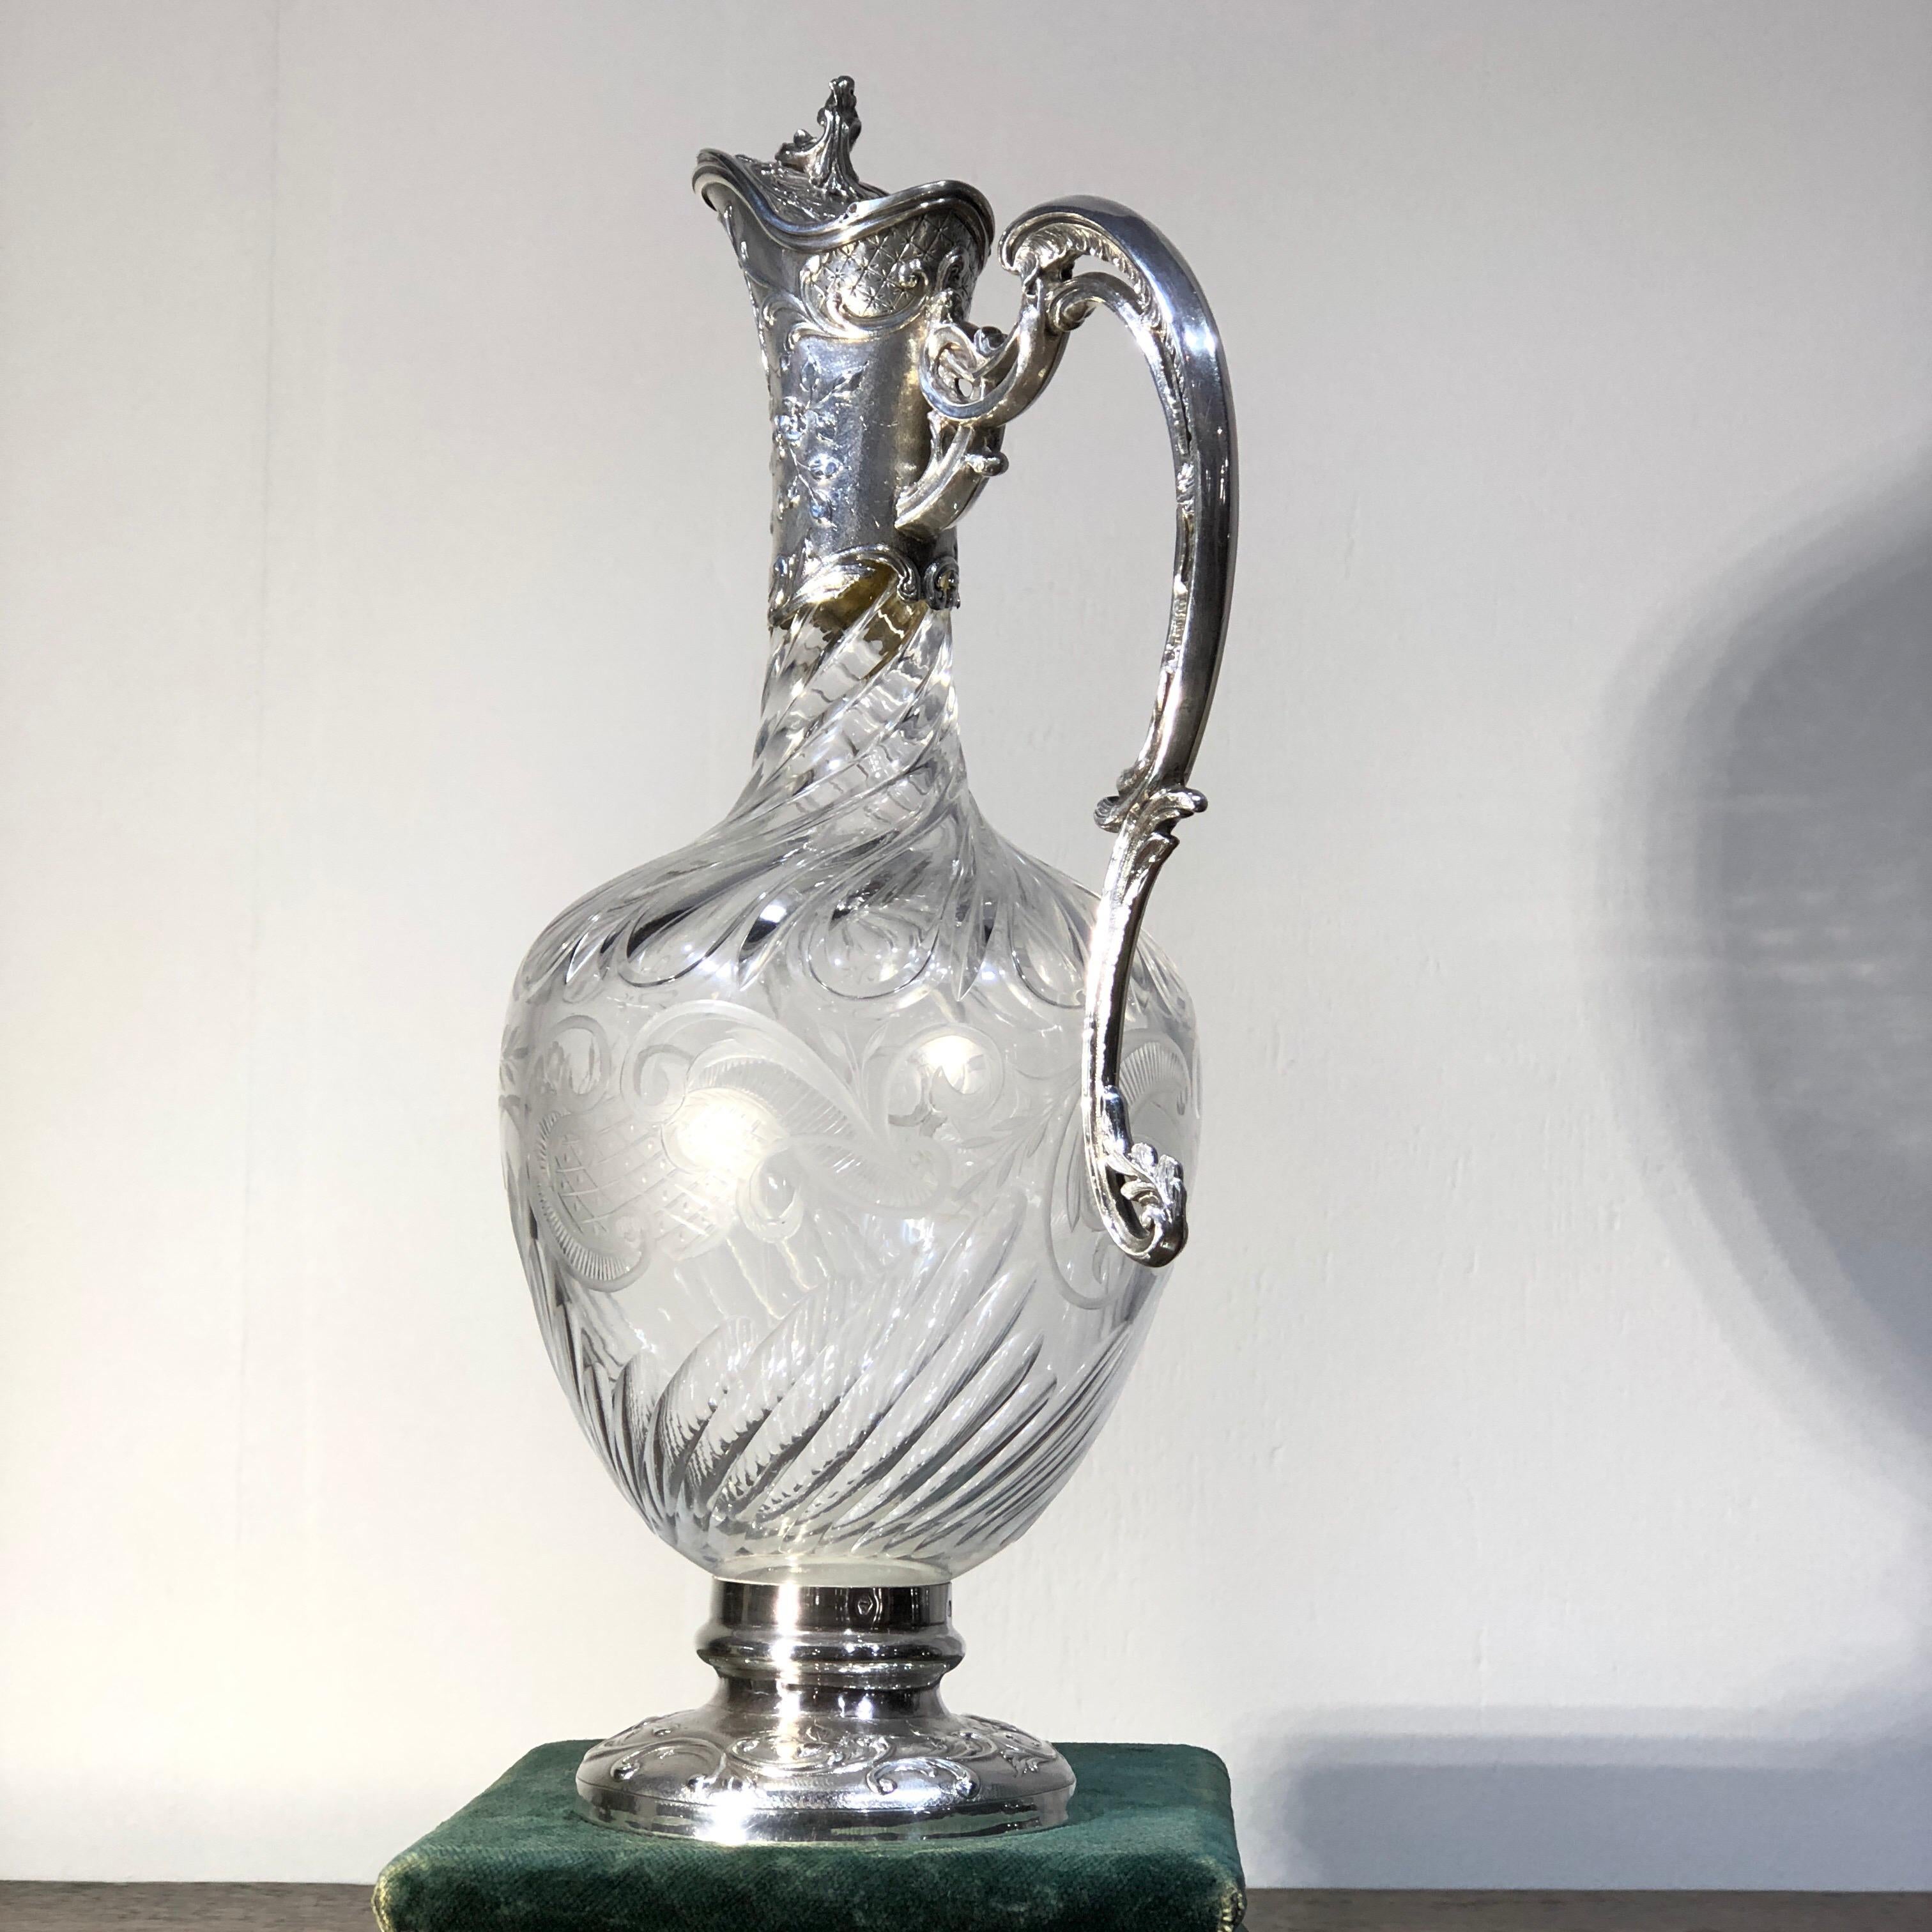 French .950 silver claret jug, the elegant silver-footed form with silver lidded spout and handle engraved and embossed in an elaborate rococo manner, the quality crystal body with spiral cut fluting to the narrow neck, with scrollwork cutting to